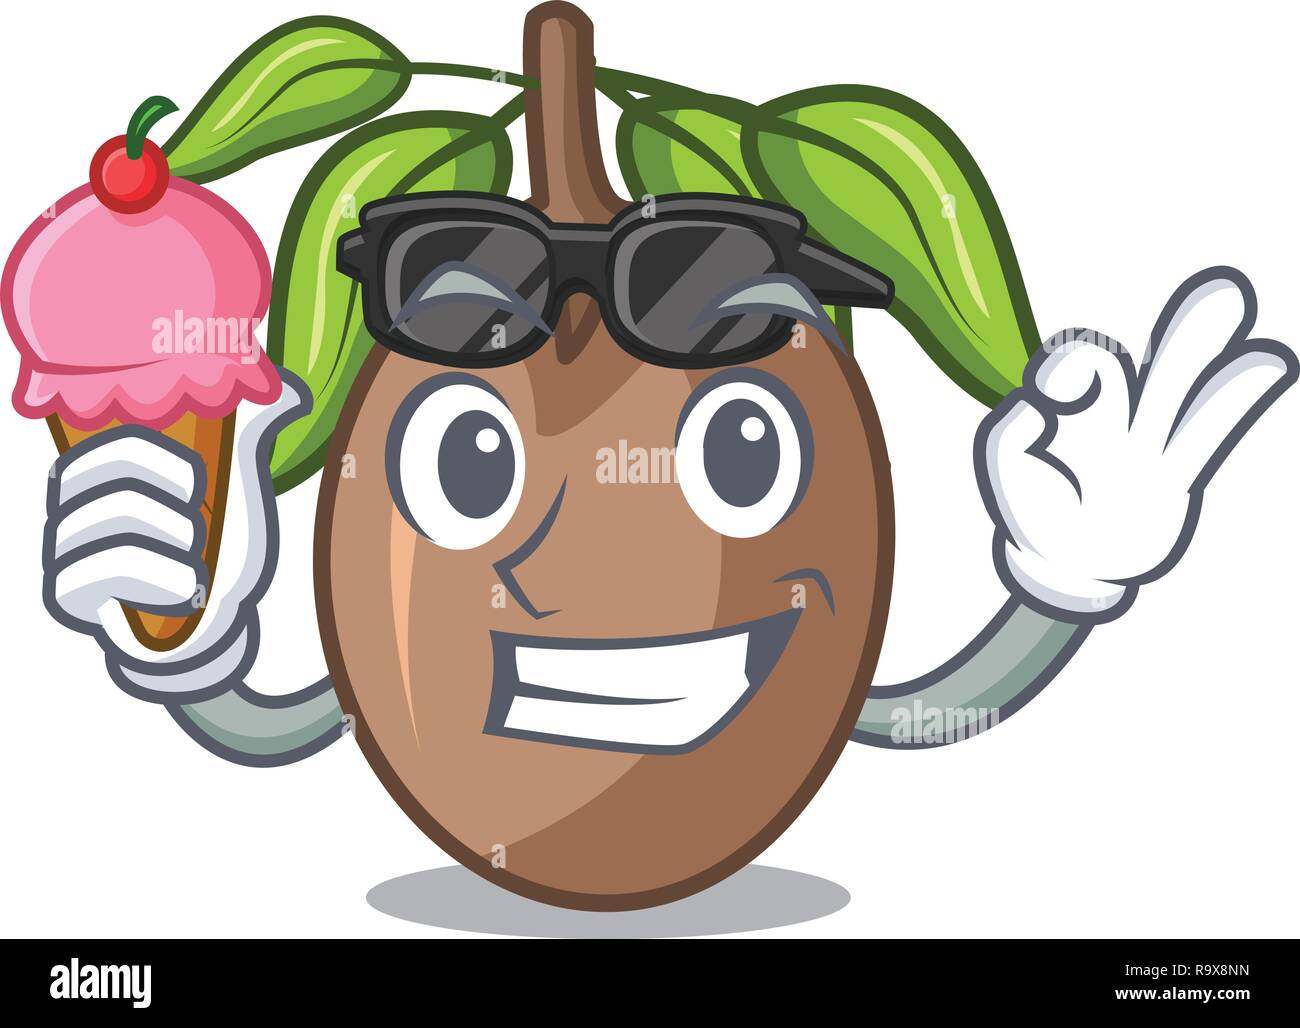 With ice cream sapodilla fruit isolated on the mascot Stock Vector